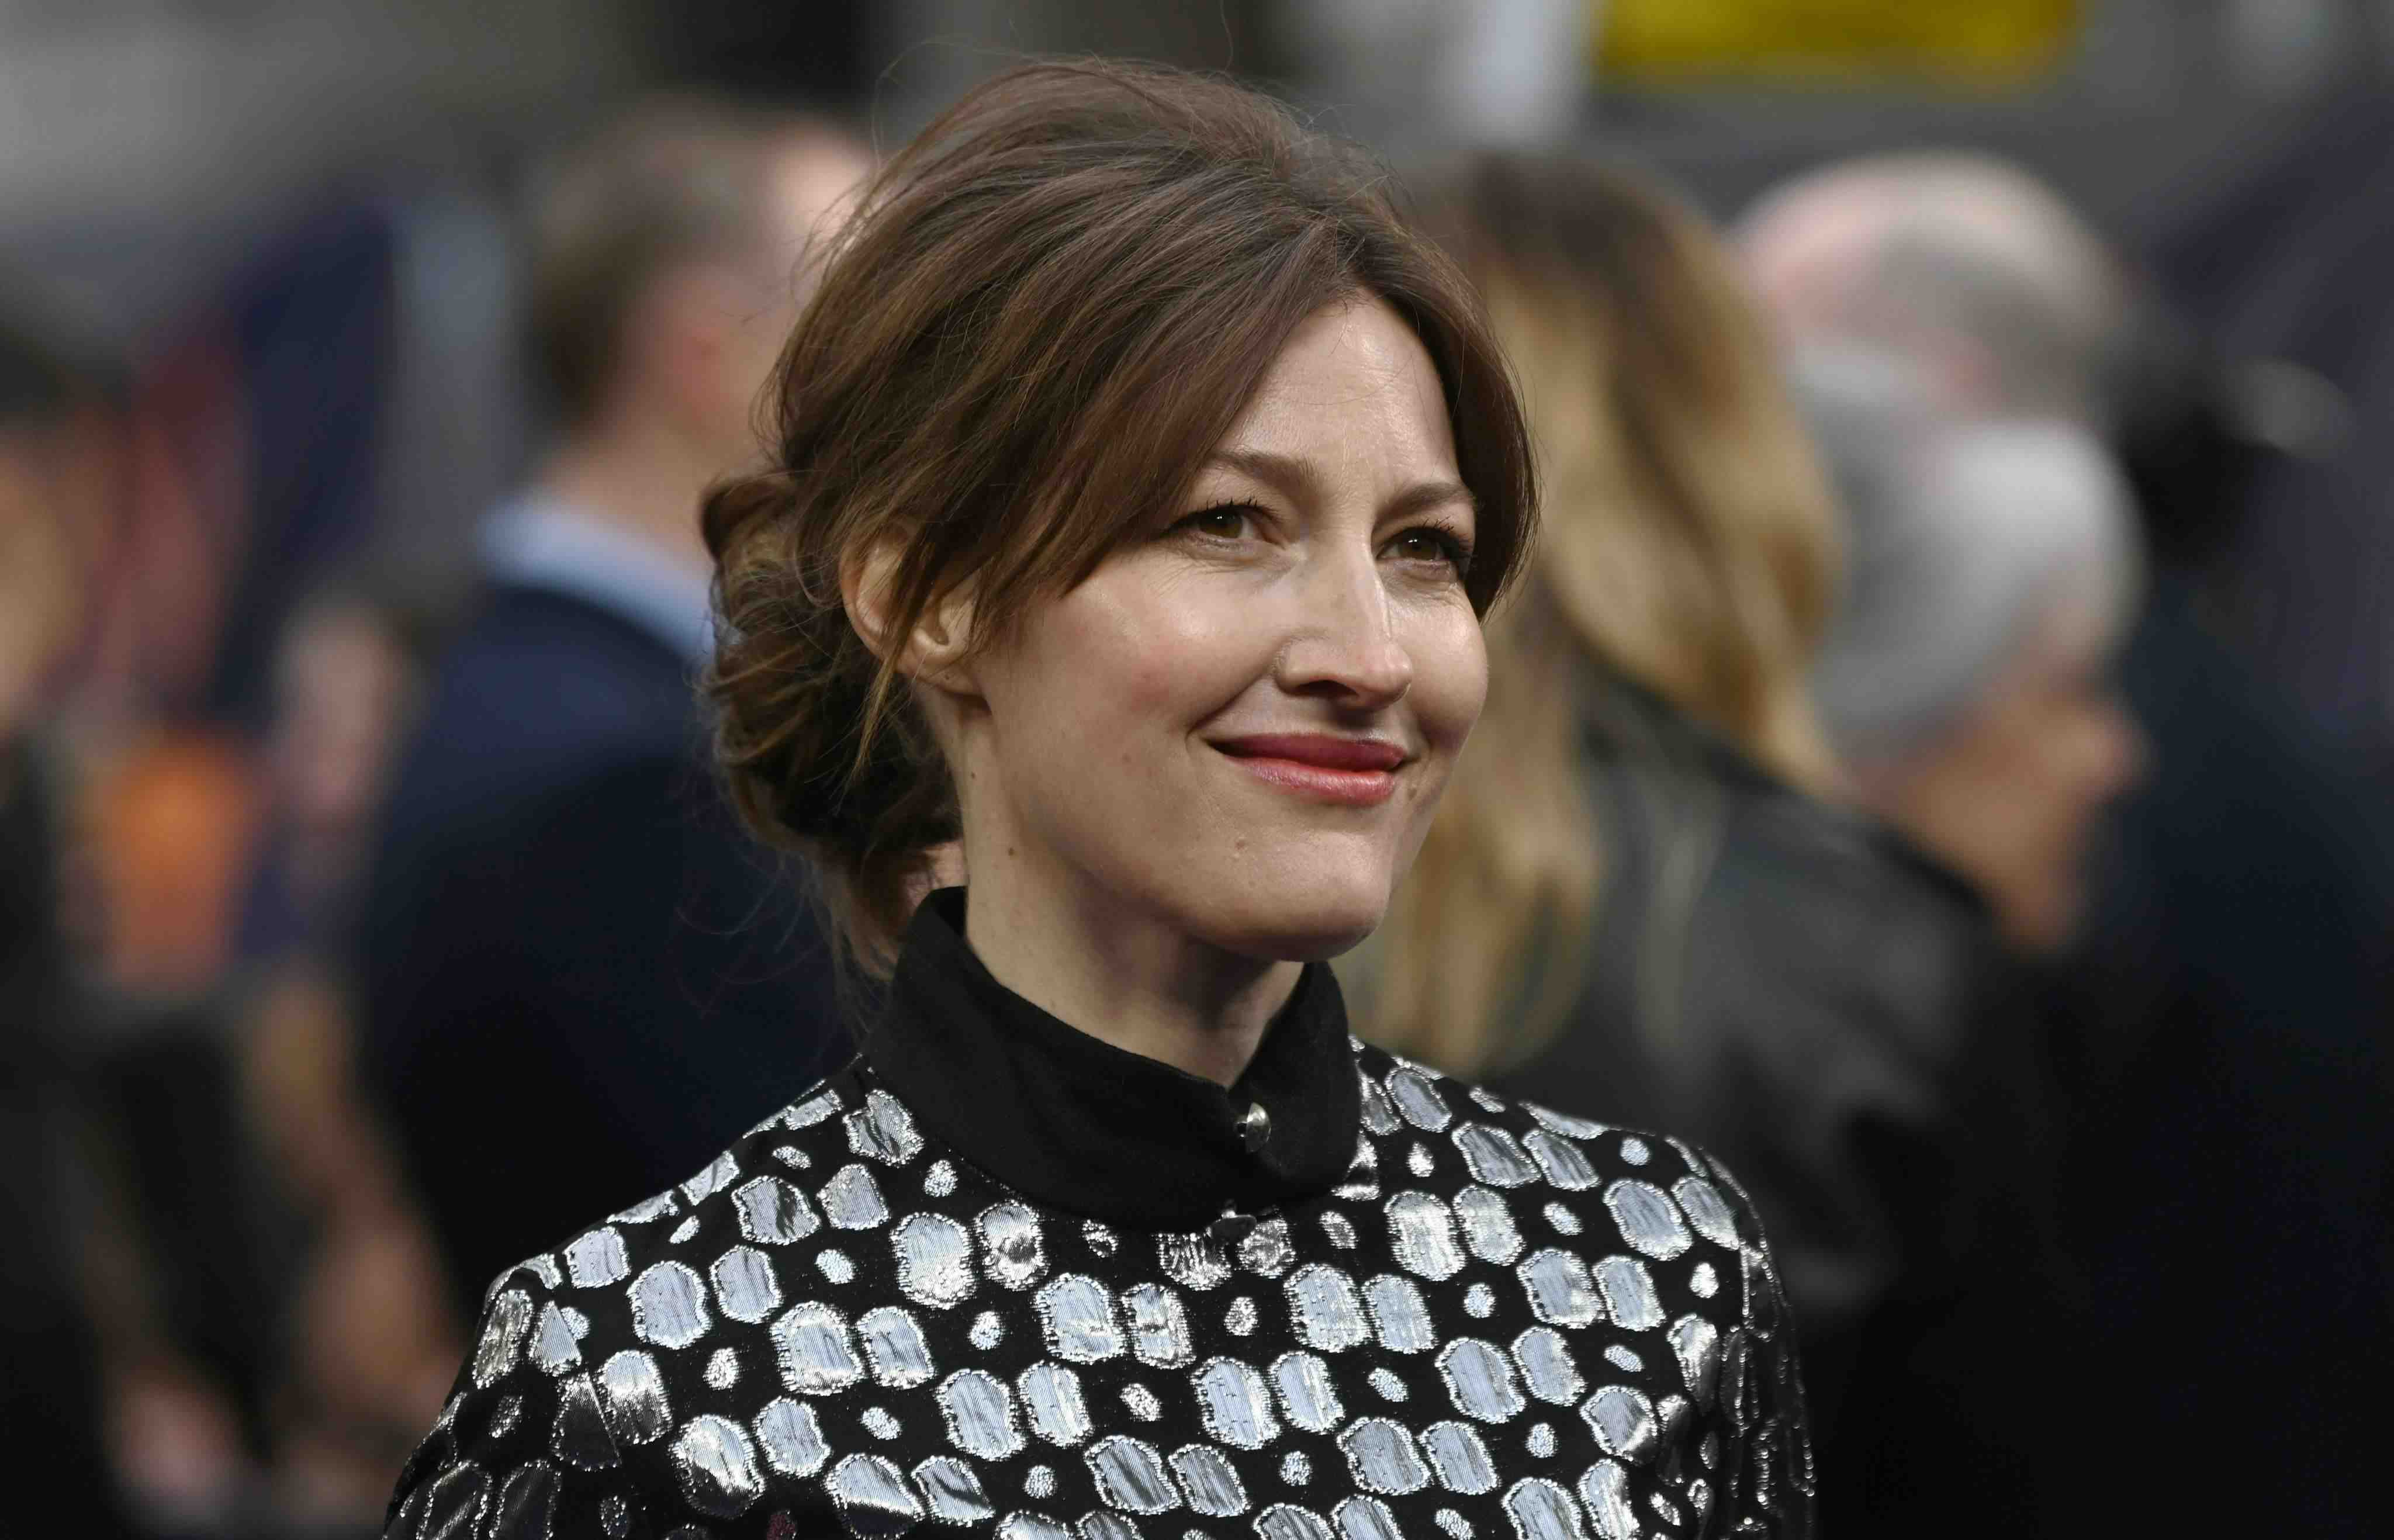 31 Facts About Kelly Macdonald - Facts.net